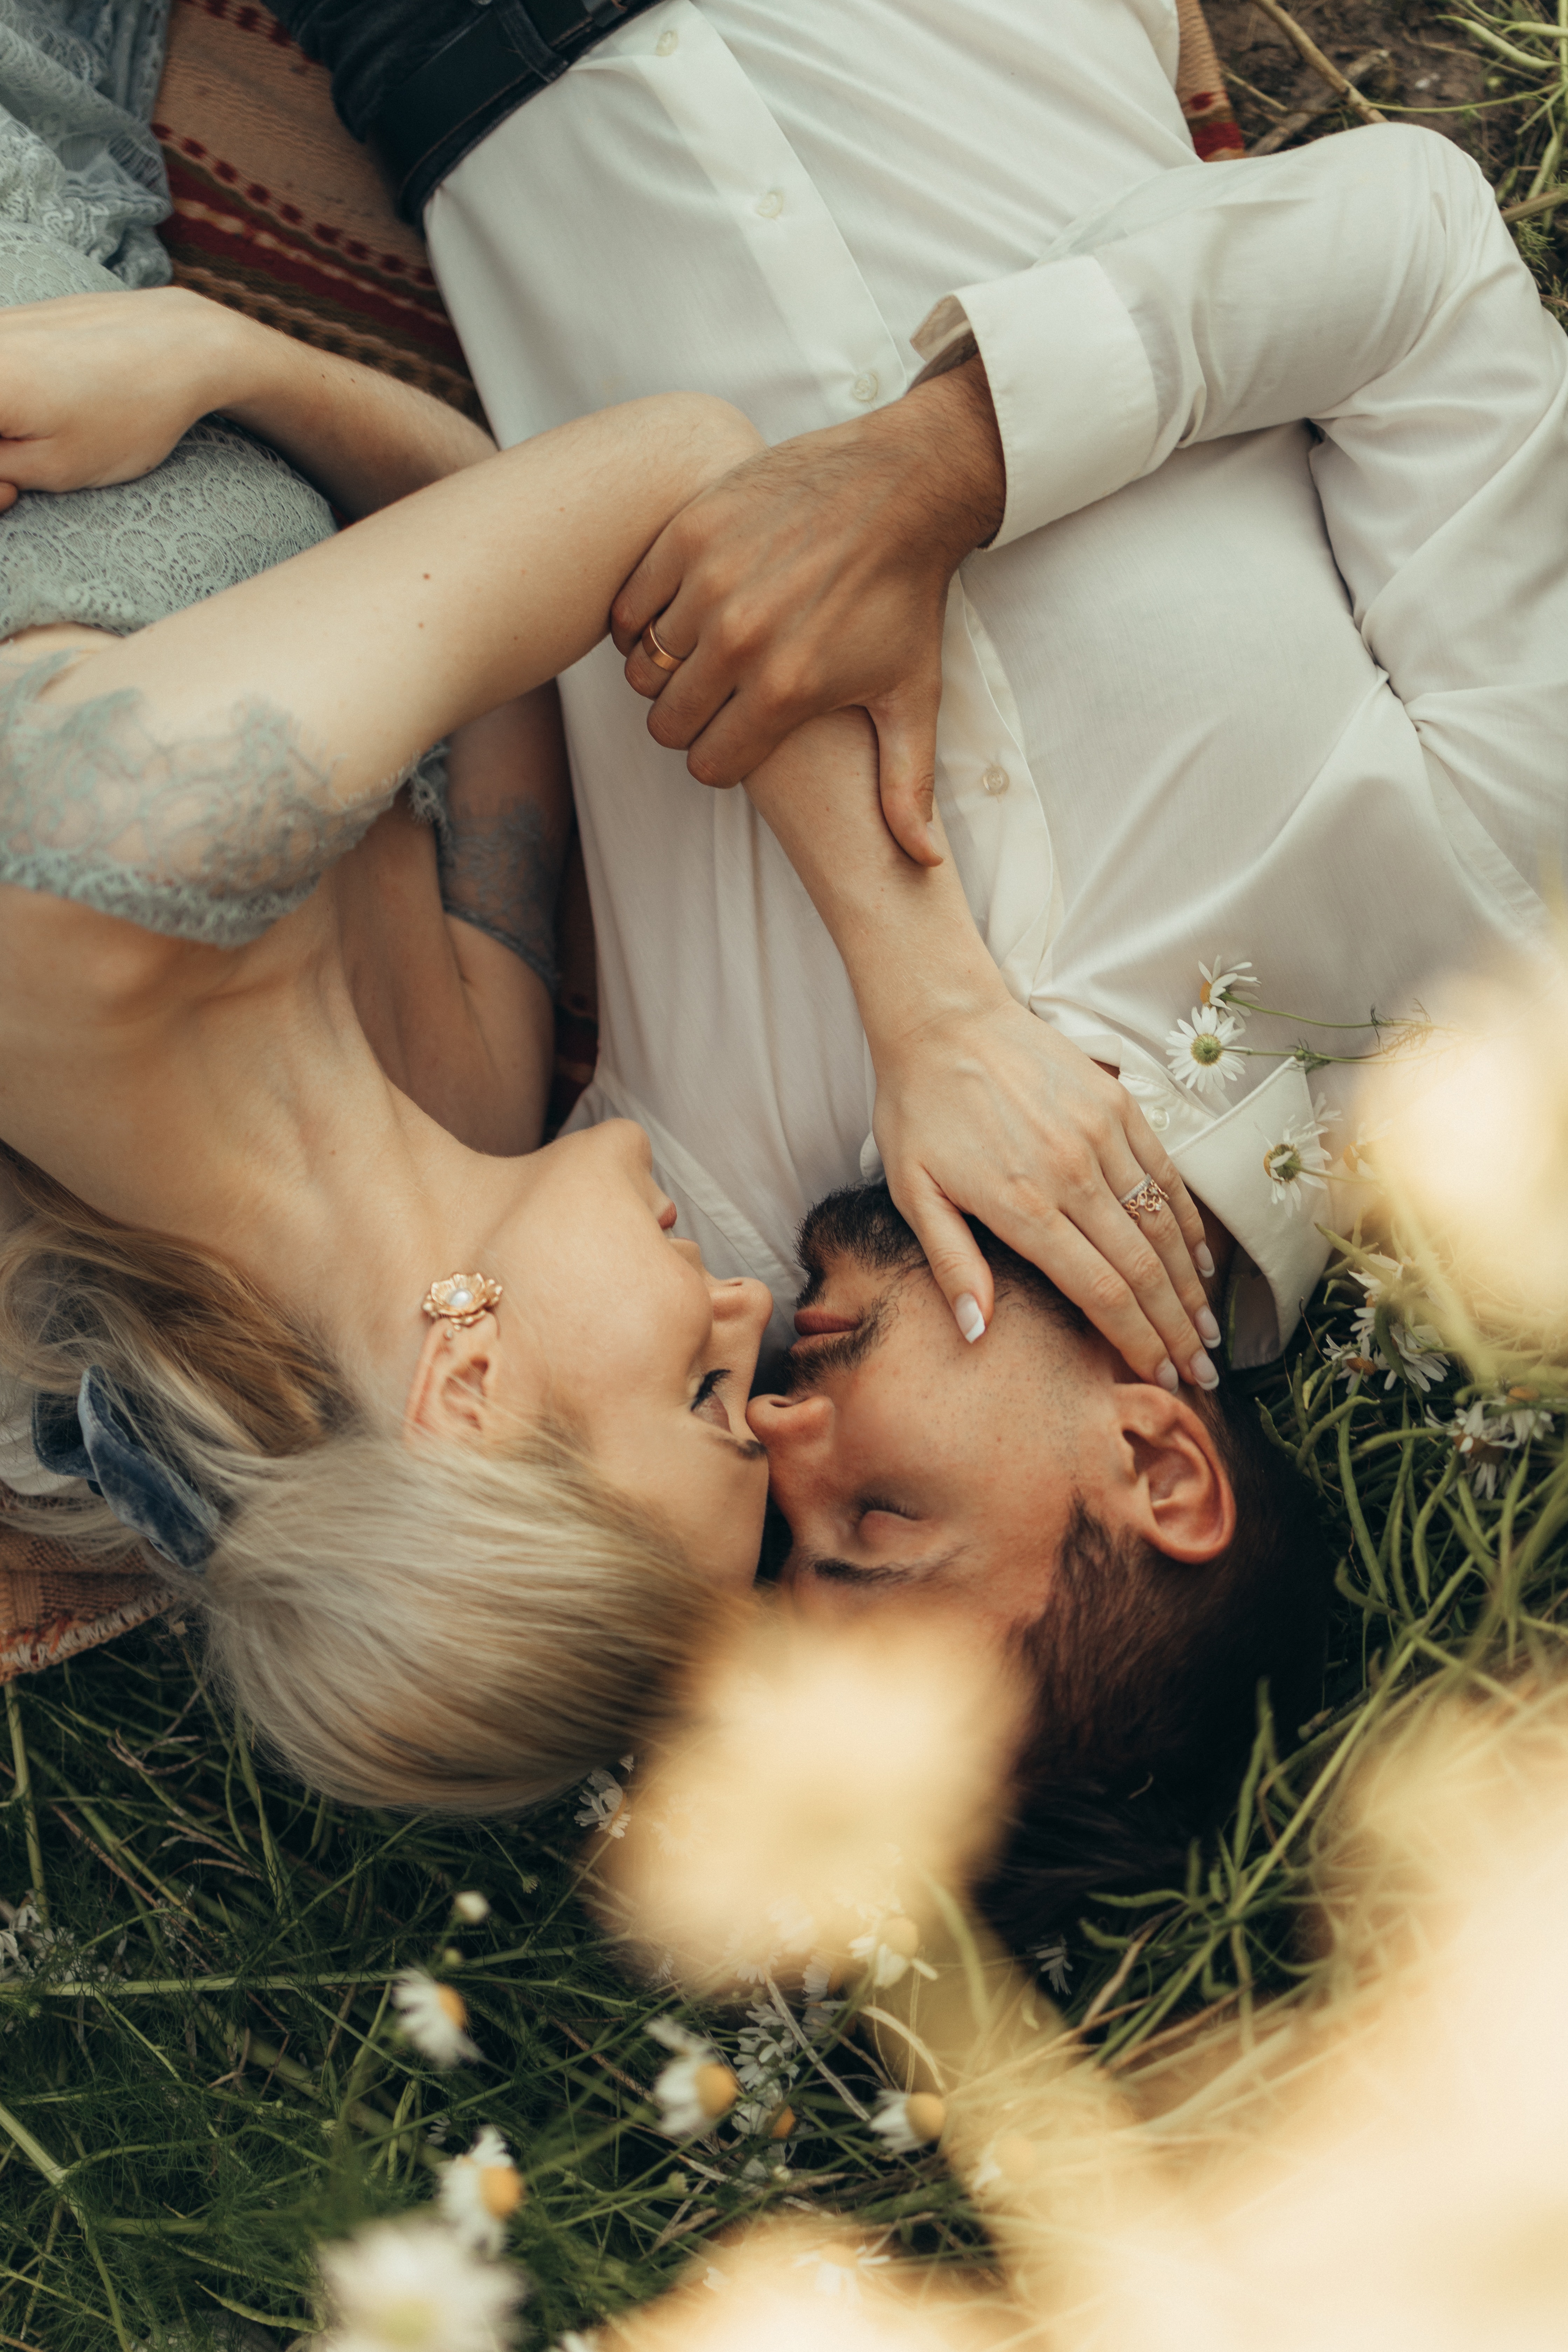 A couple lying on the grass together. | Source: Pexels